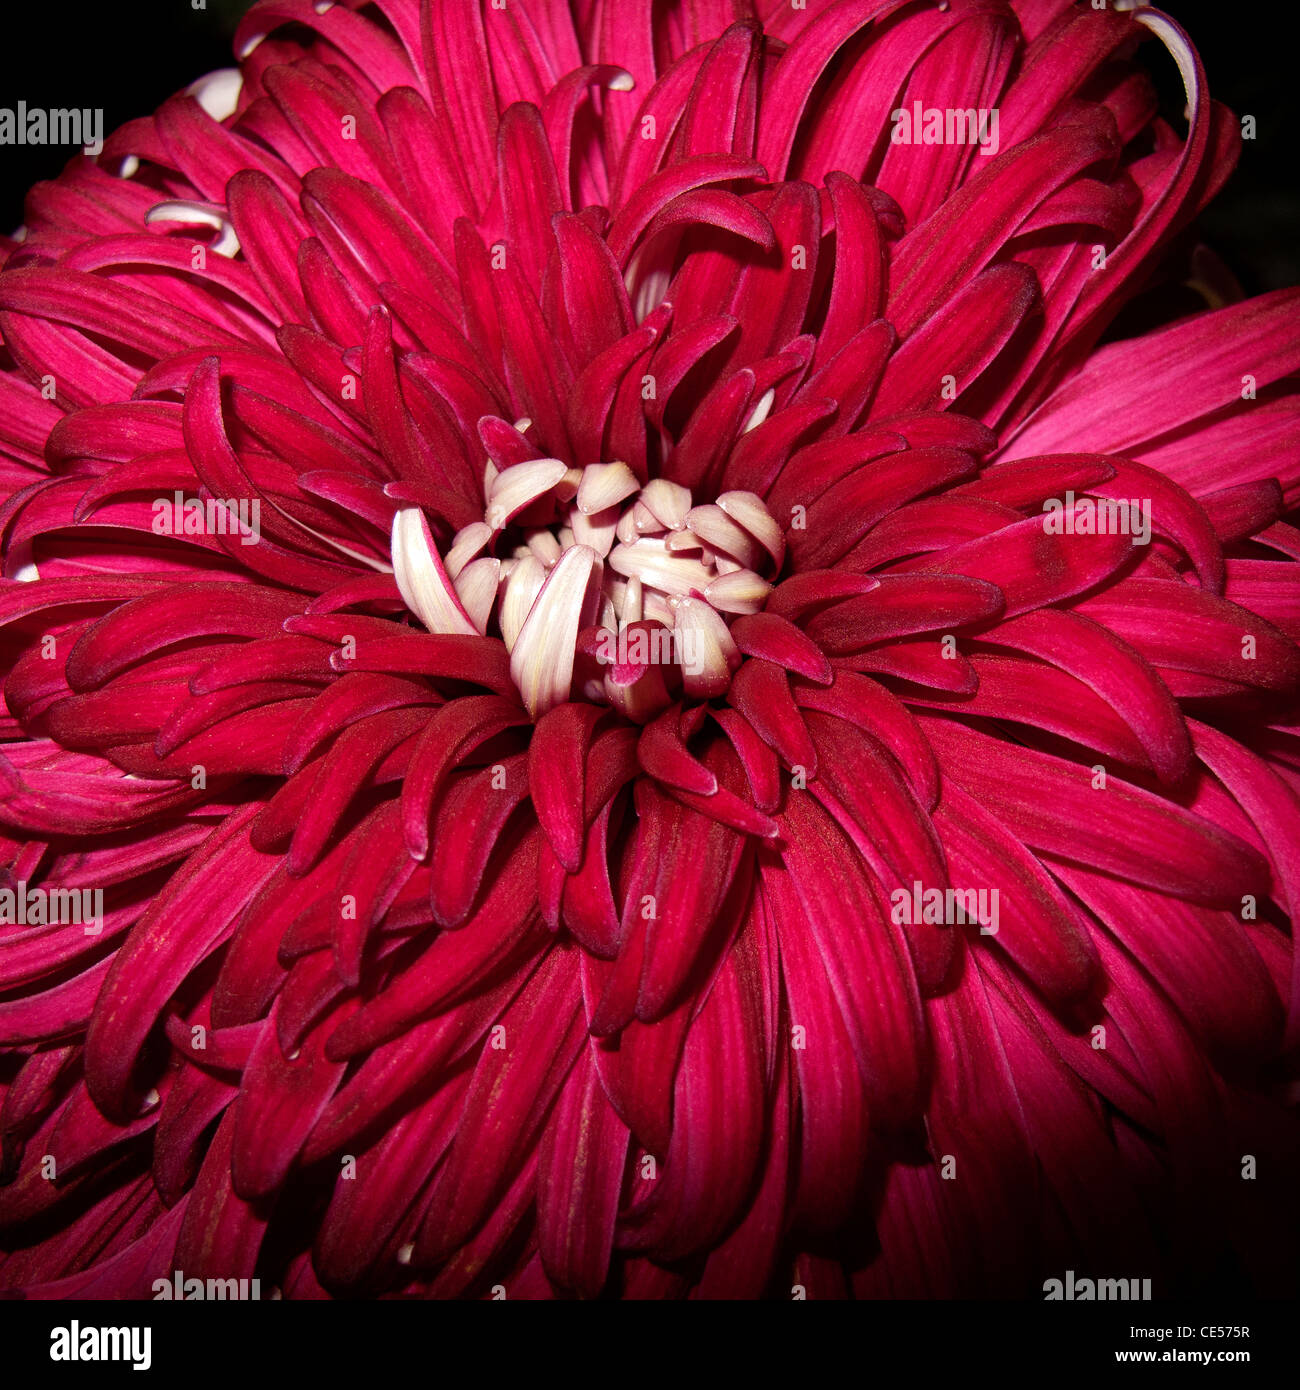 Perfection. A perfect red chrysanthemum means 'I love you' . A flower of optimism, happiness and to celebrate long life. Stock Photo